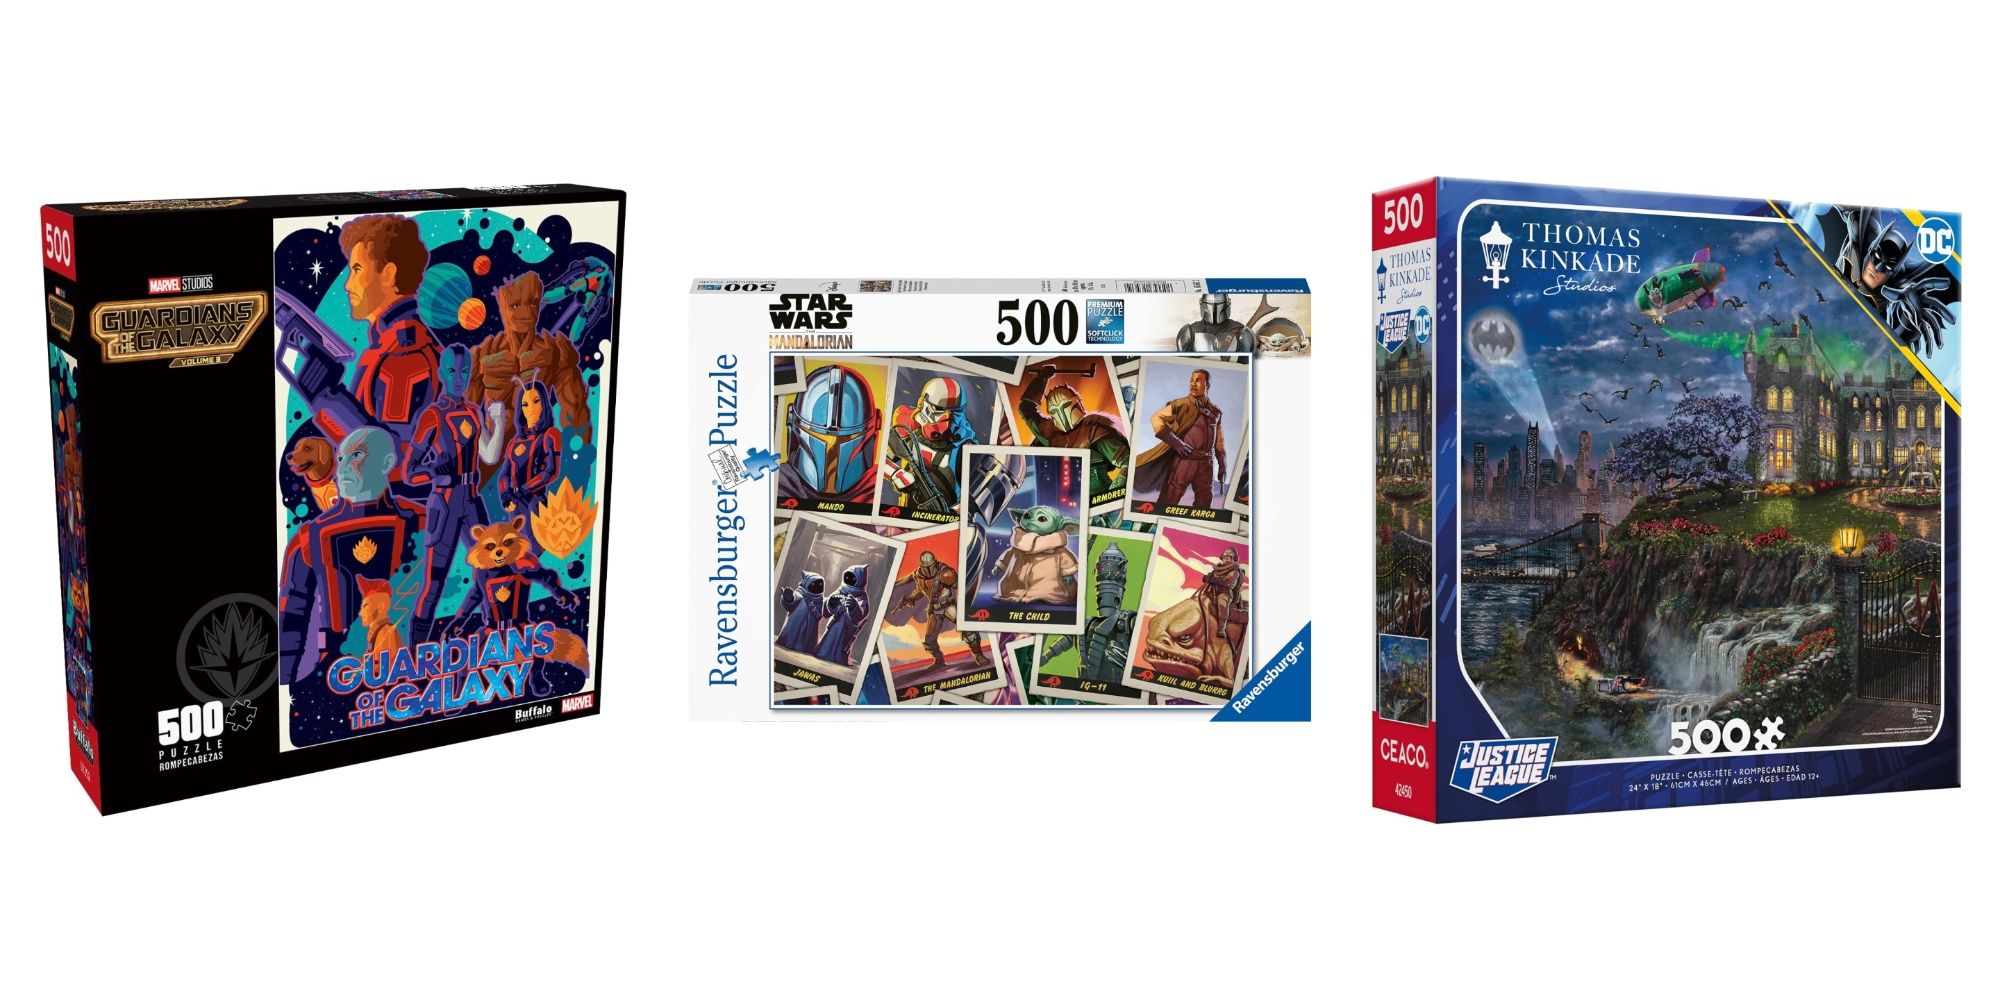 500-Piece Jigsaw Puzzles Featured Split Image Of Guardians of the Galaxy, Star Wars, and Batman Puzzles